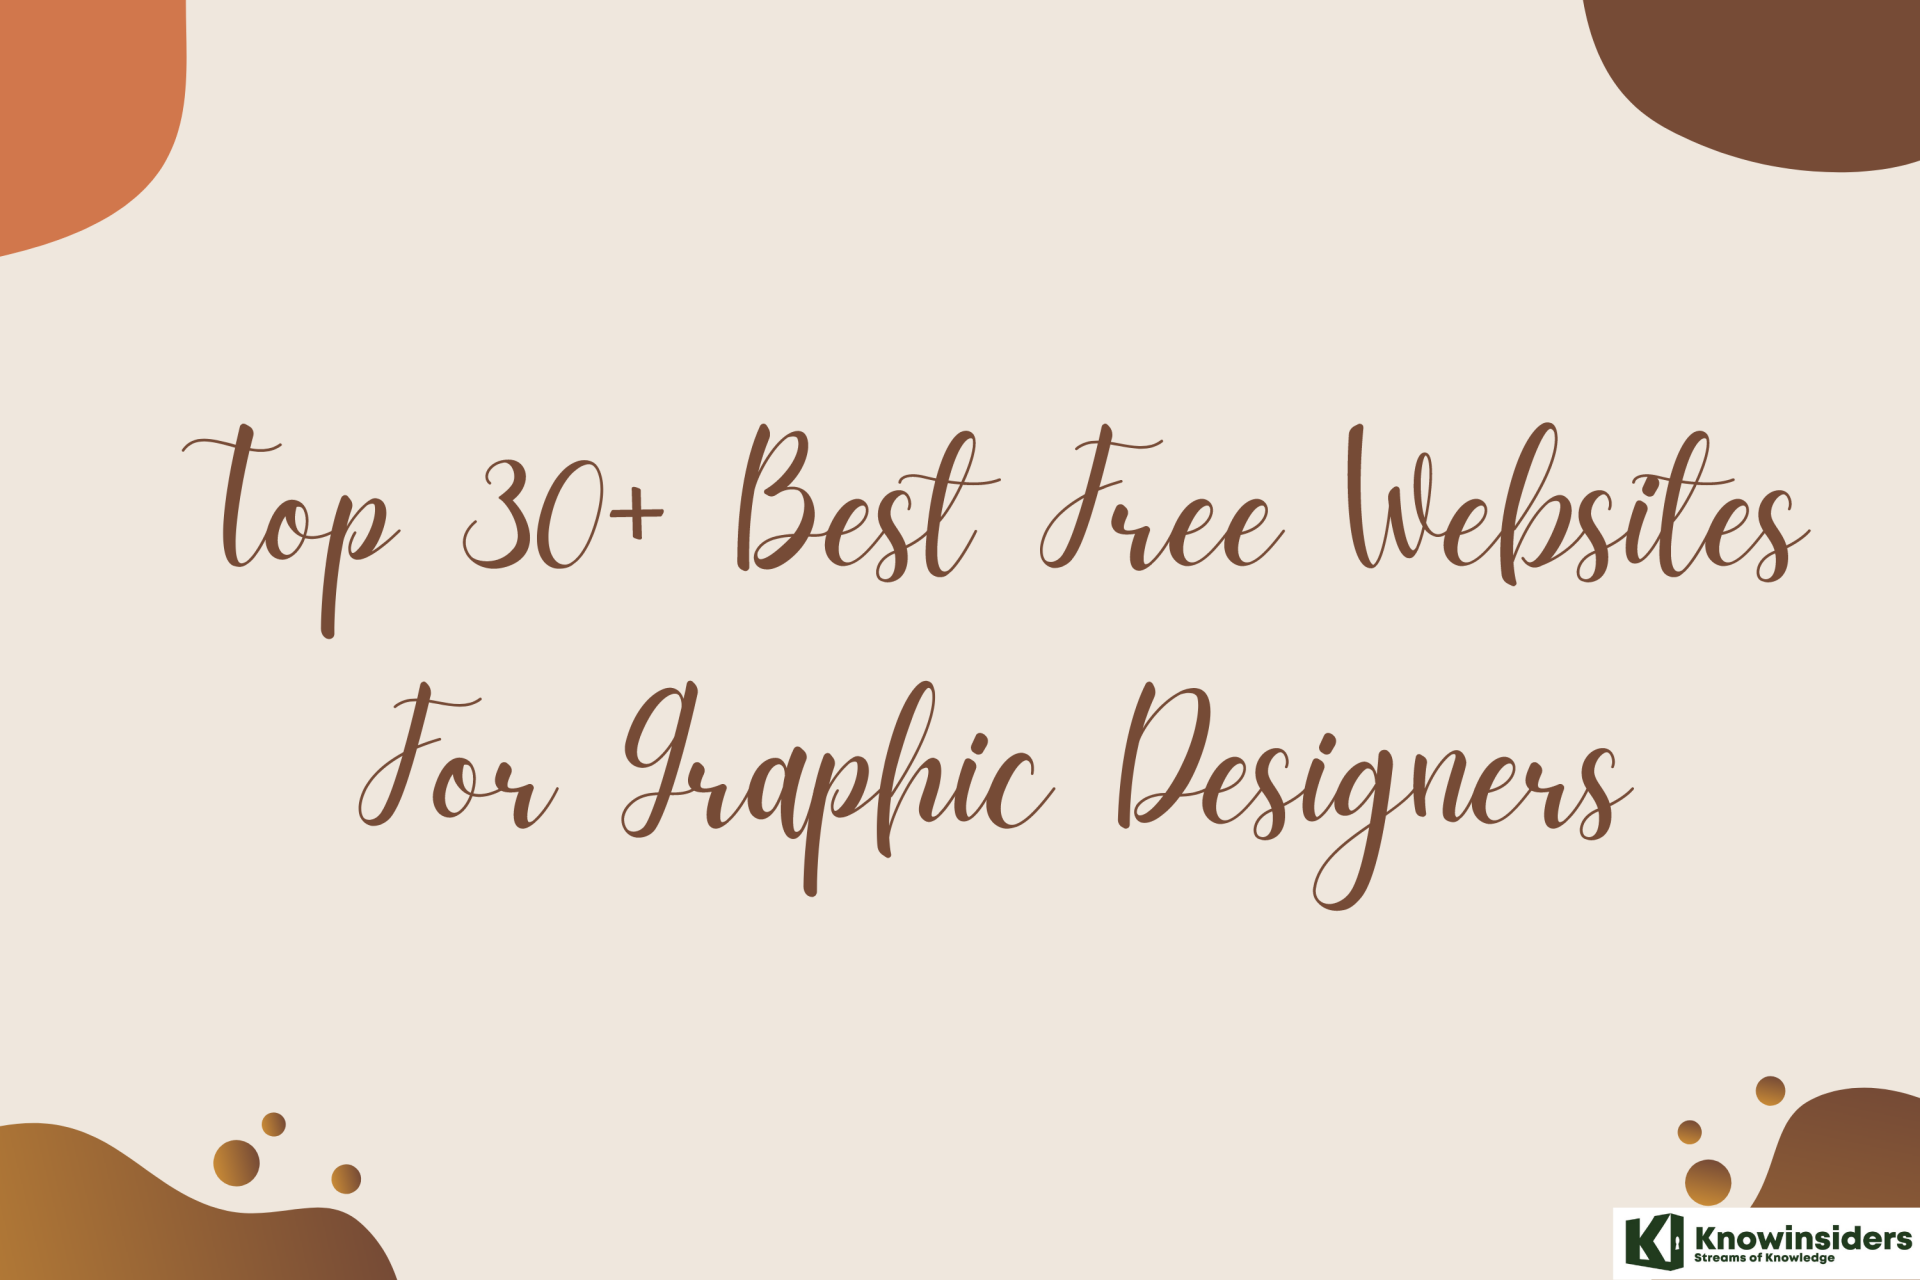 Top 30+ Best Free Sites For Graphic Designers